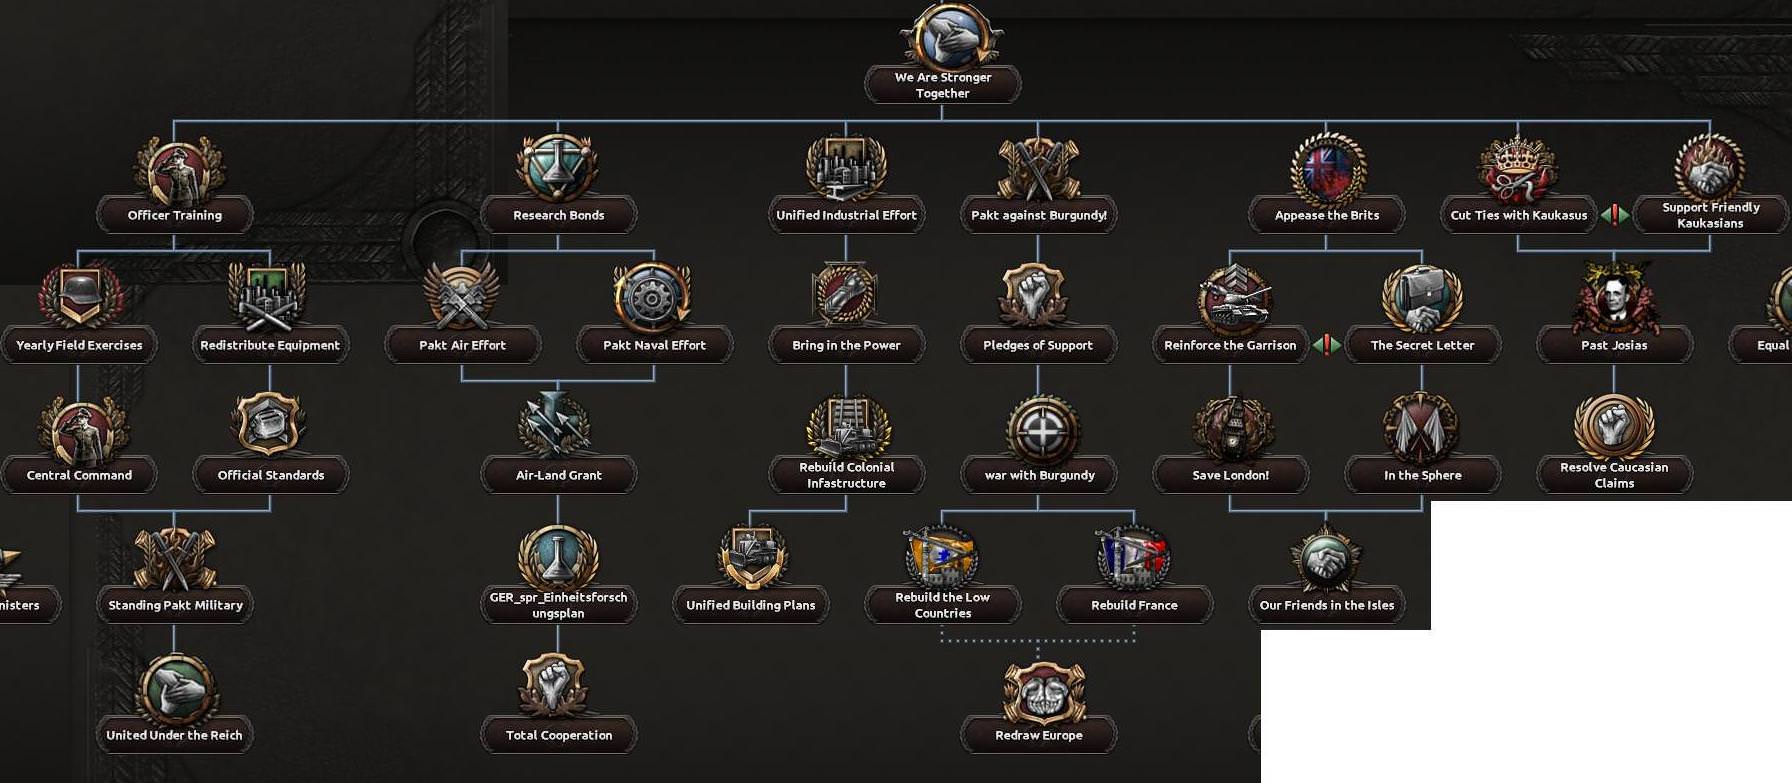 HOI4 Dev Diary - Combat and Stats changes